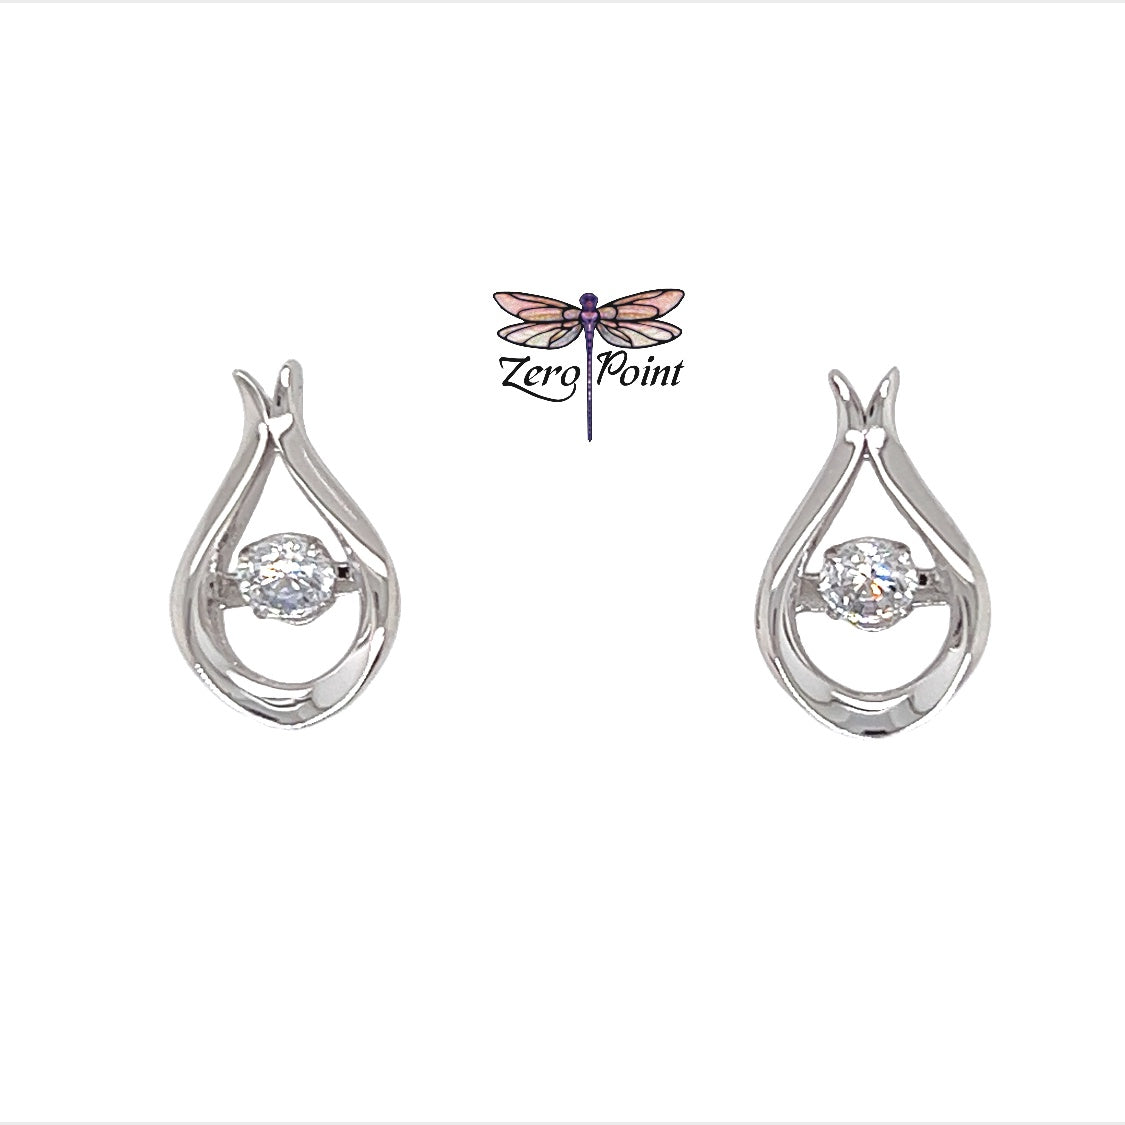 CZ Dancing Stone Earrings - Zero Point Crystals